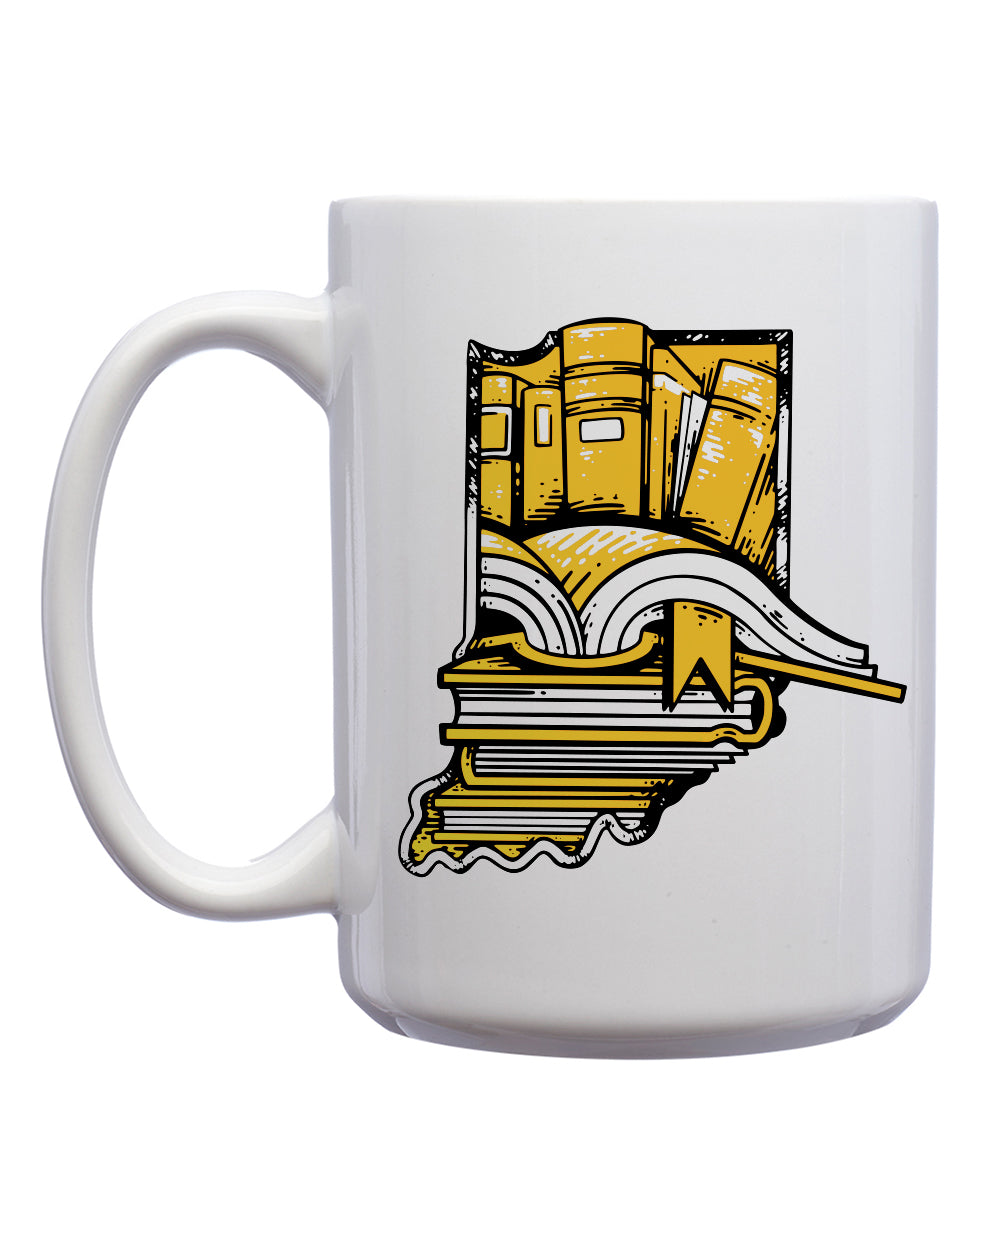 Support Your Local Library Mug - United State of Indiana: Indiana-Made T-Shirts and Gifts